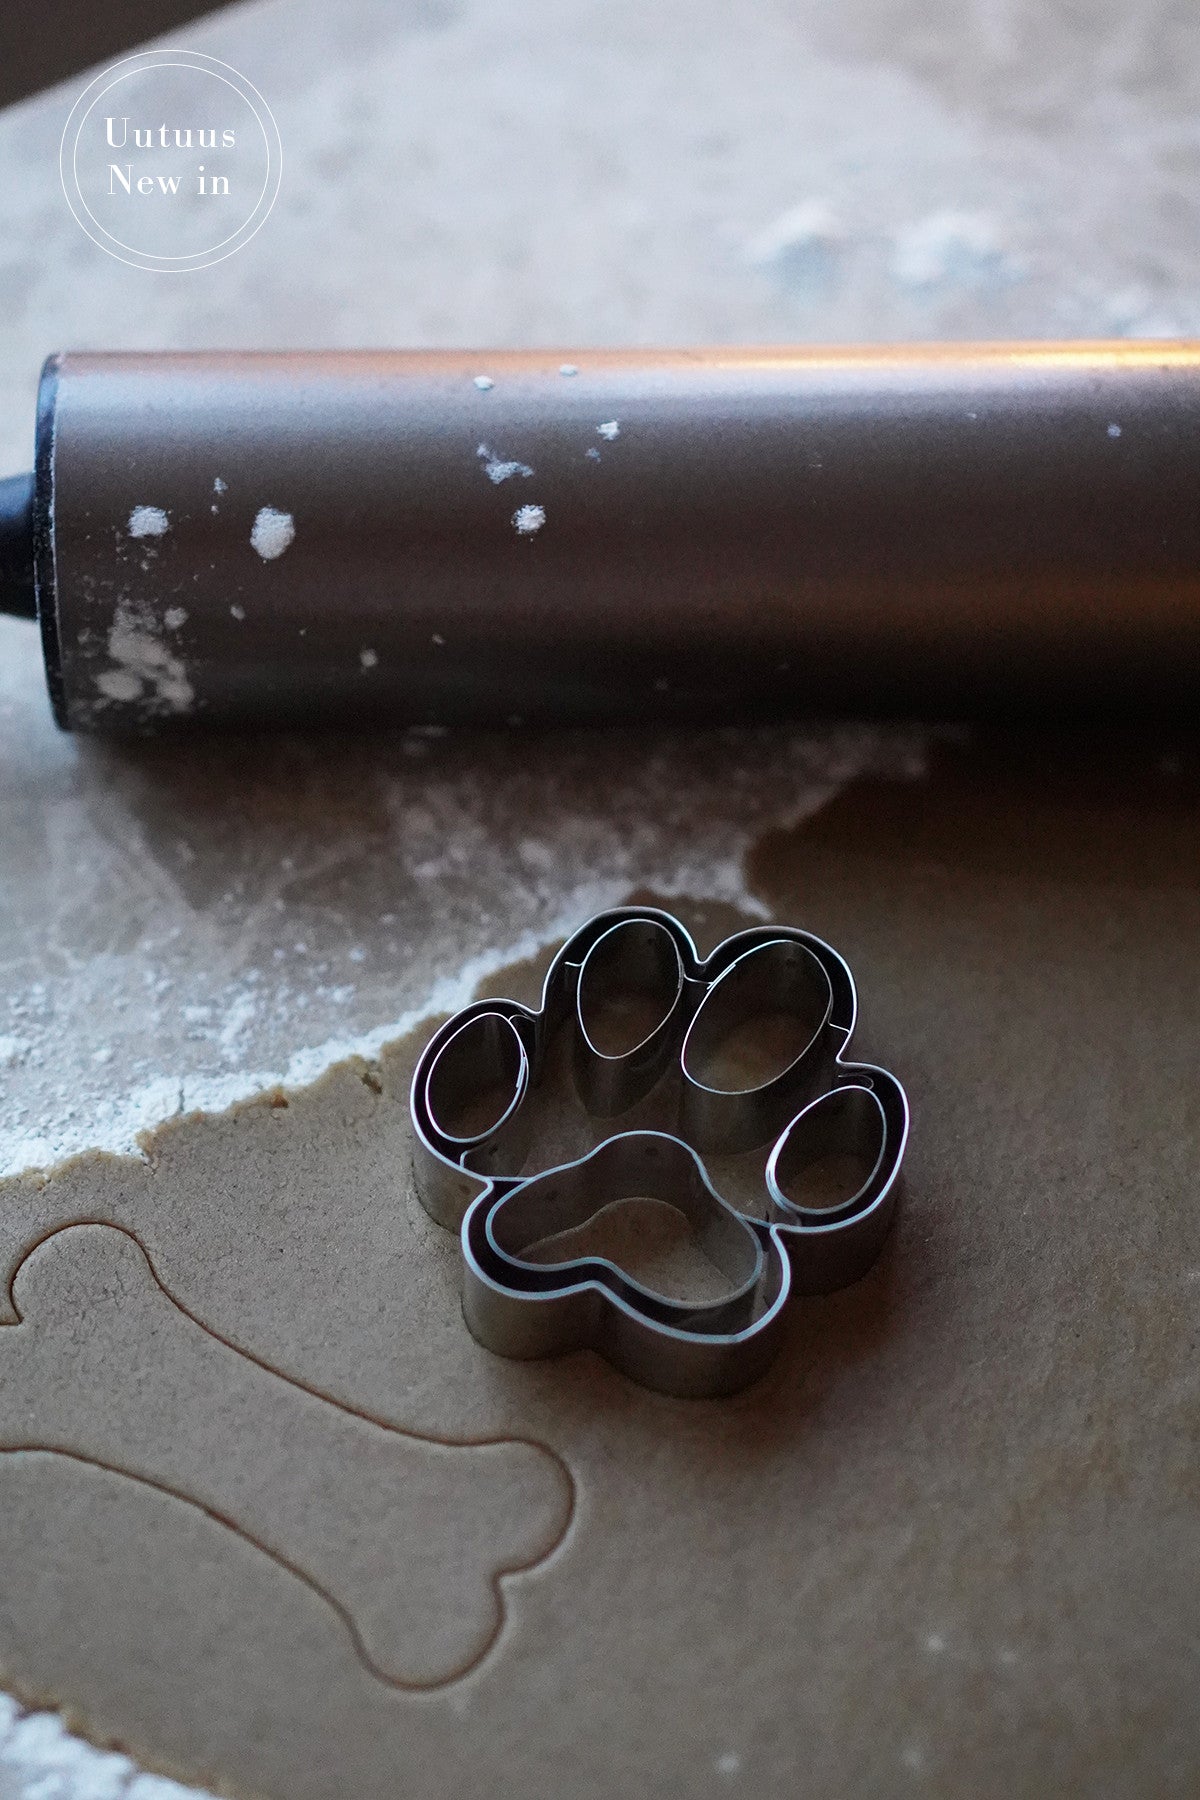 PAW 7 cm COOKIE CUTTER